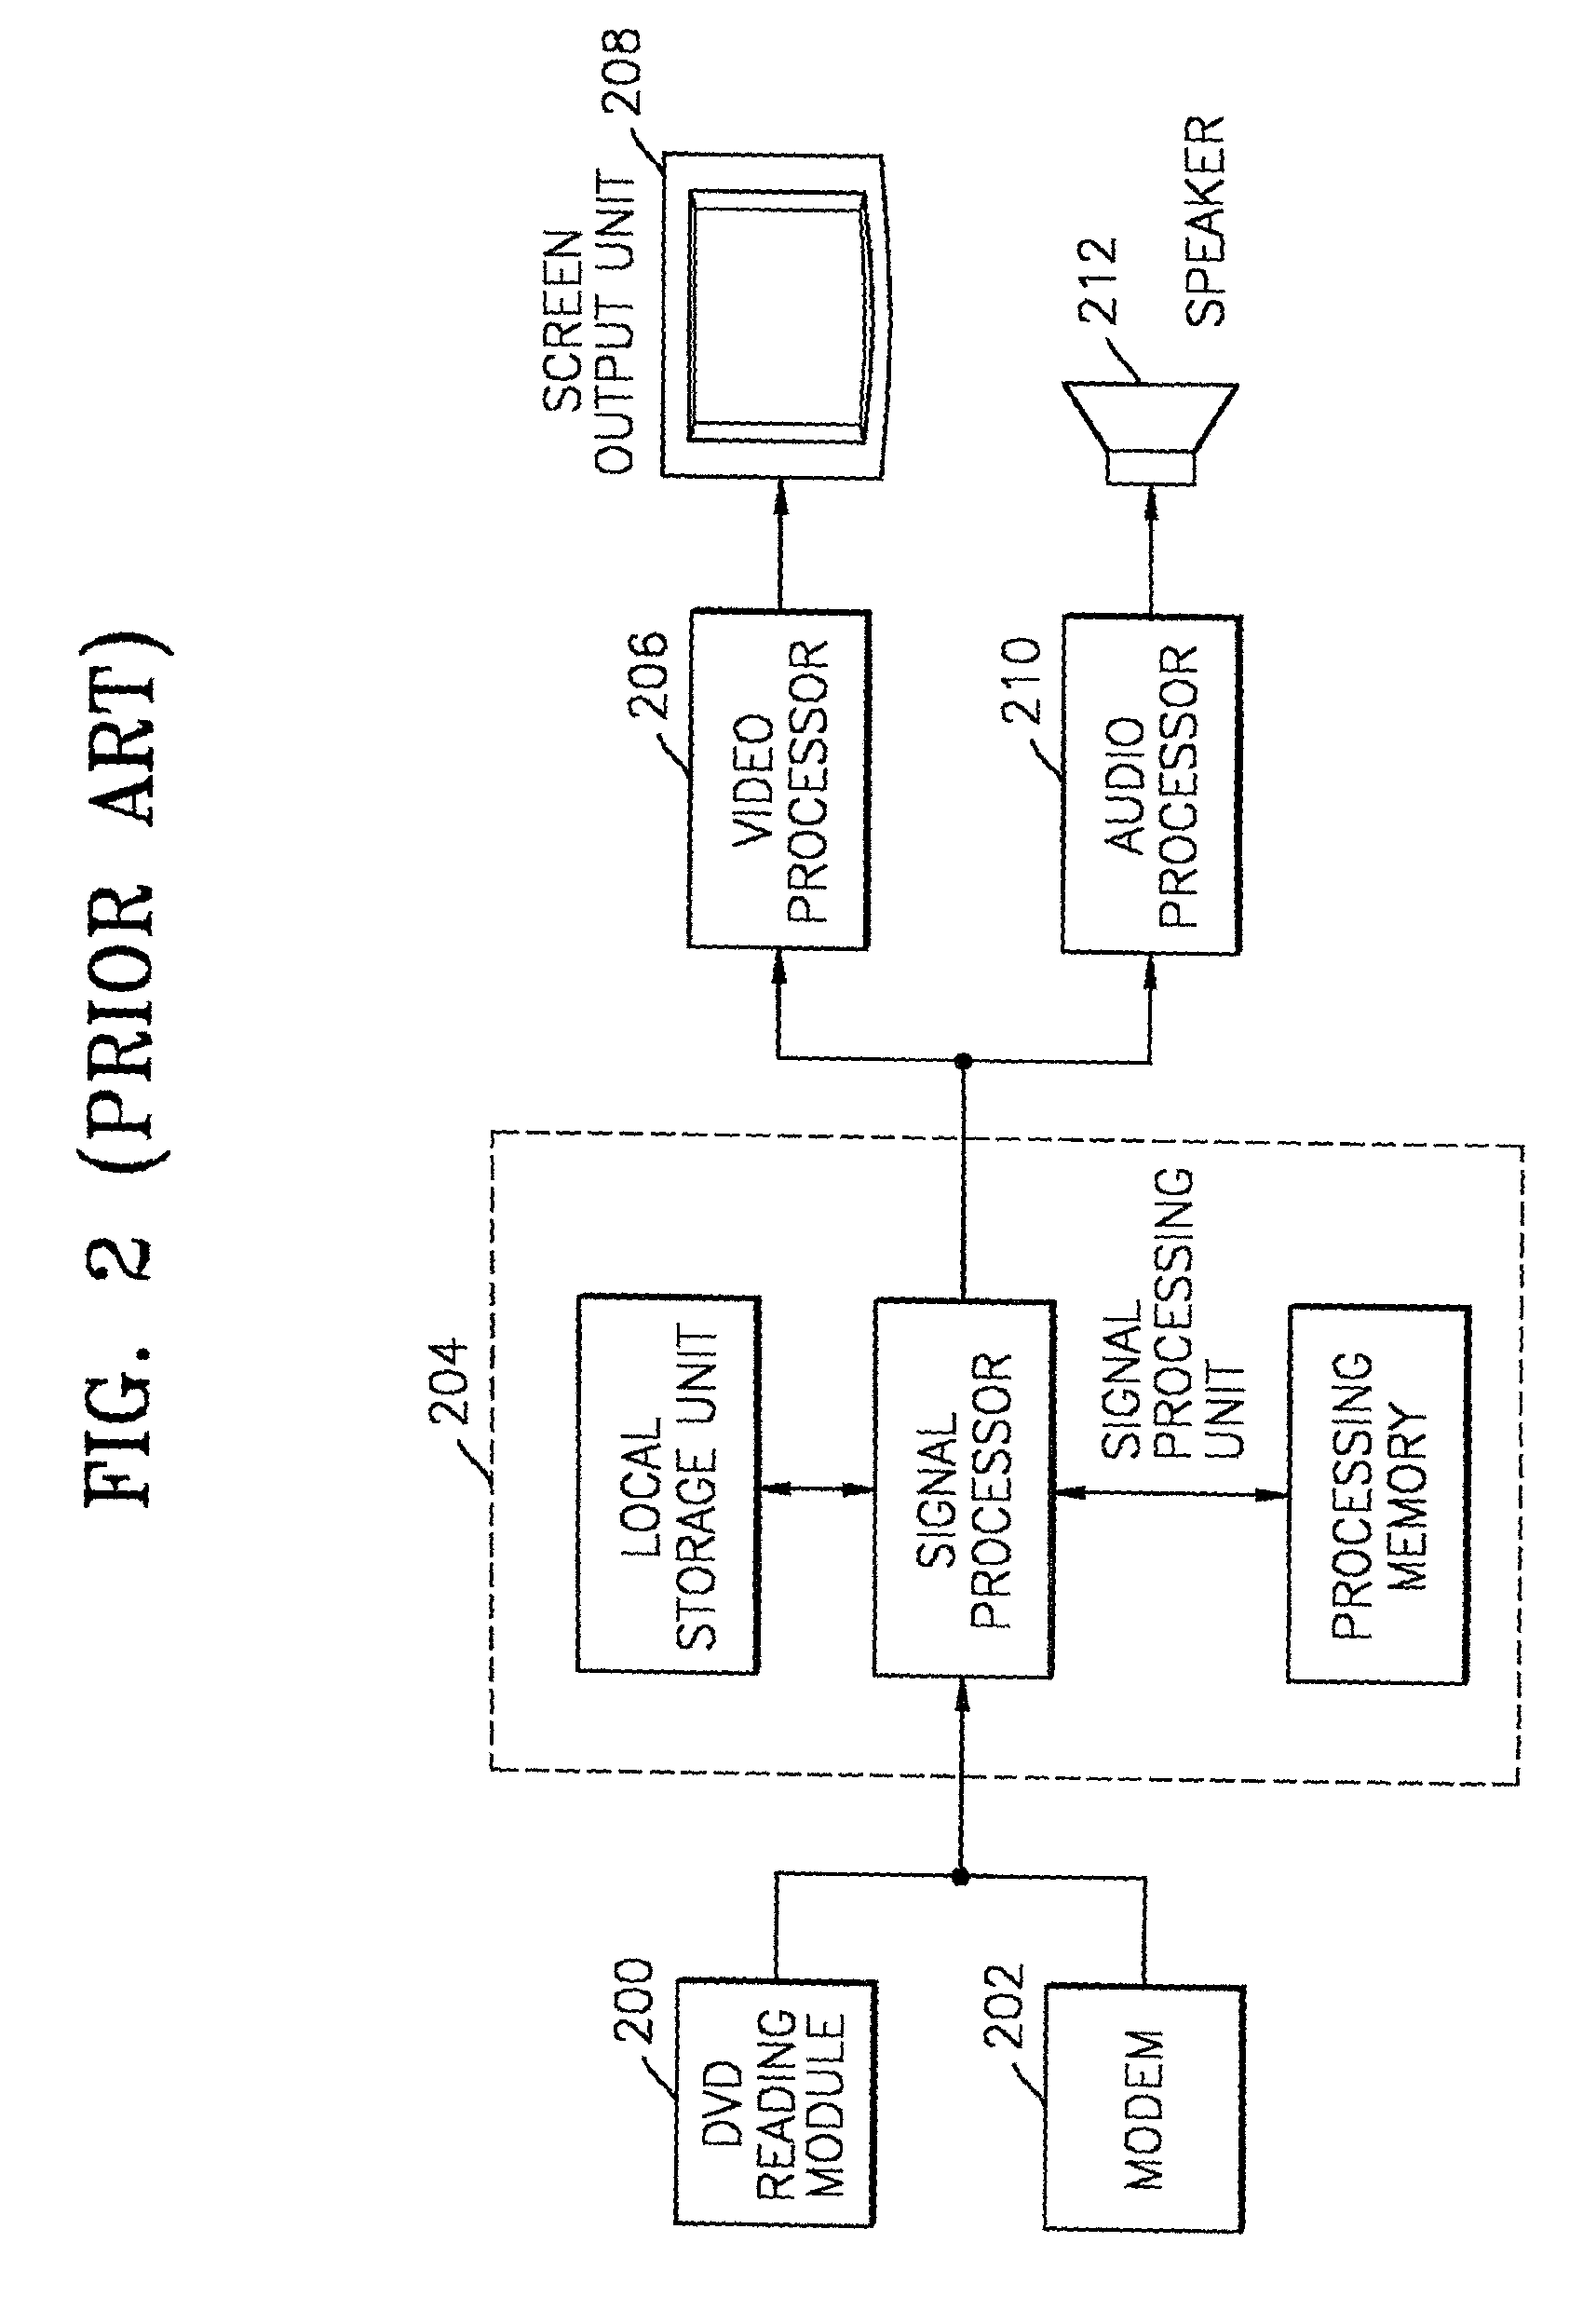 Storage medium having preloaded font information, and apparatus for and method of reproducing data from storage medium